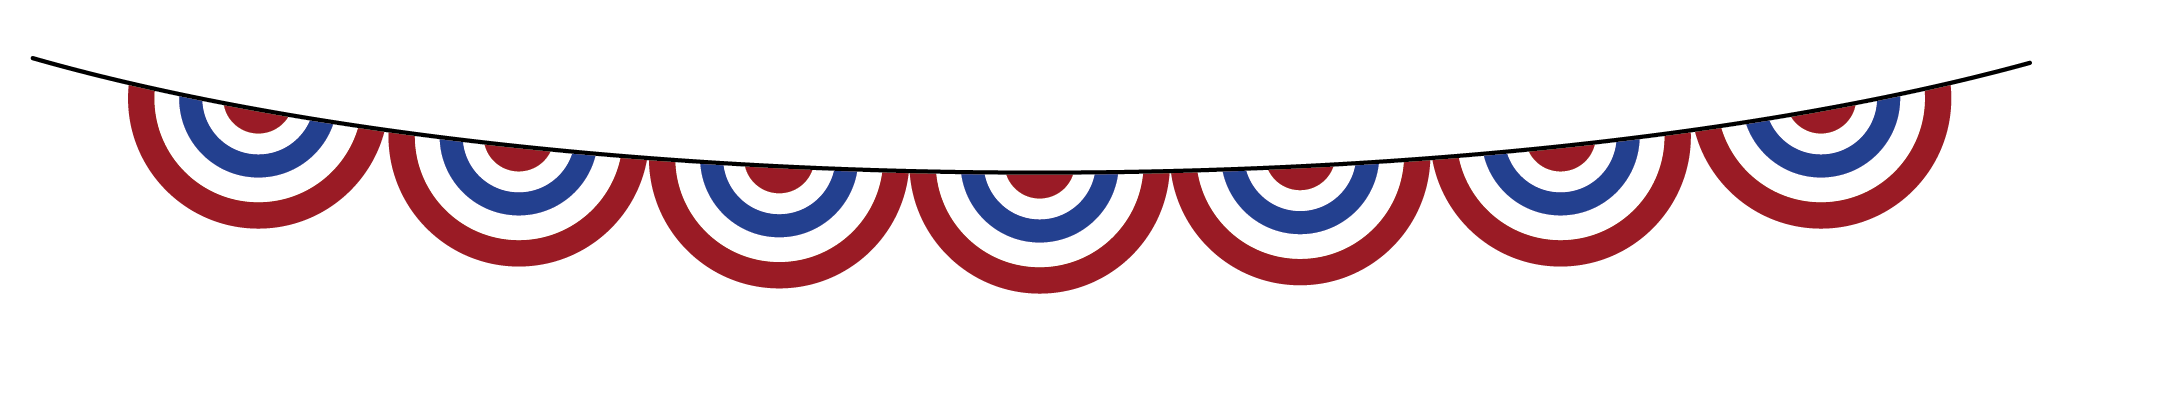 happy 4th of july clipart banner